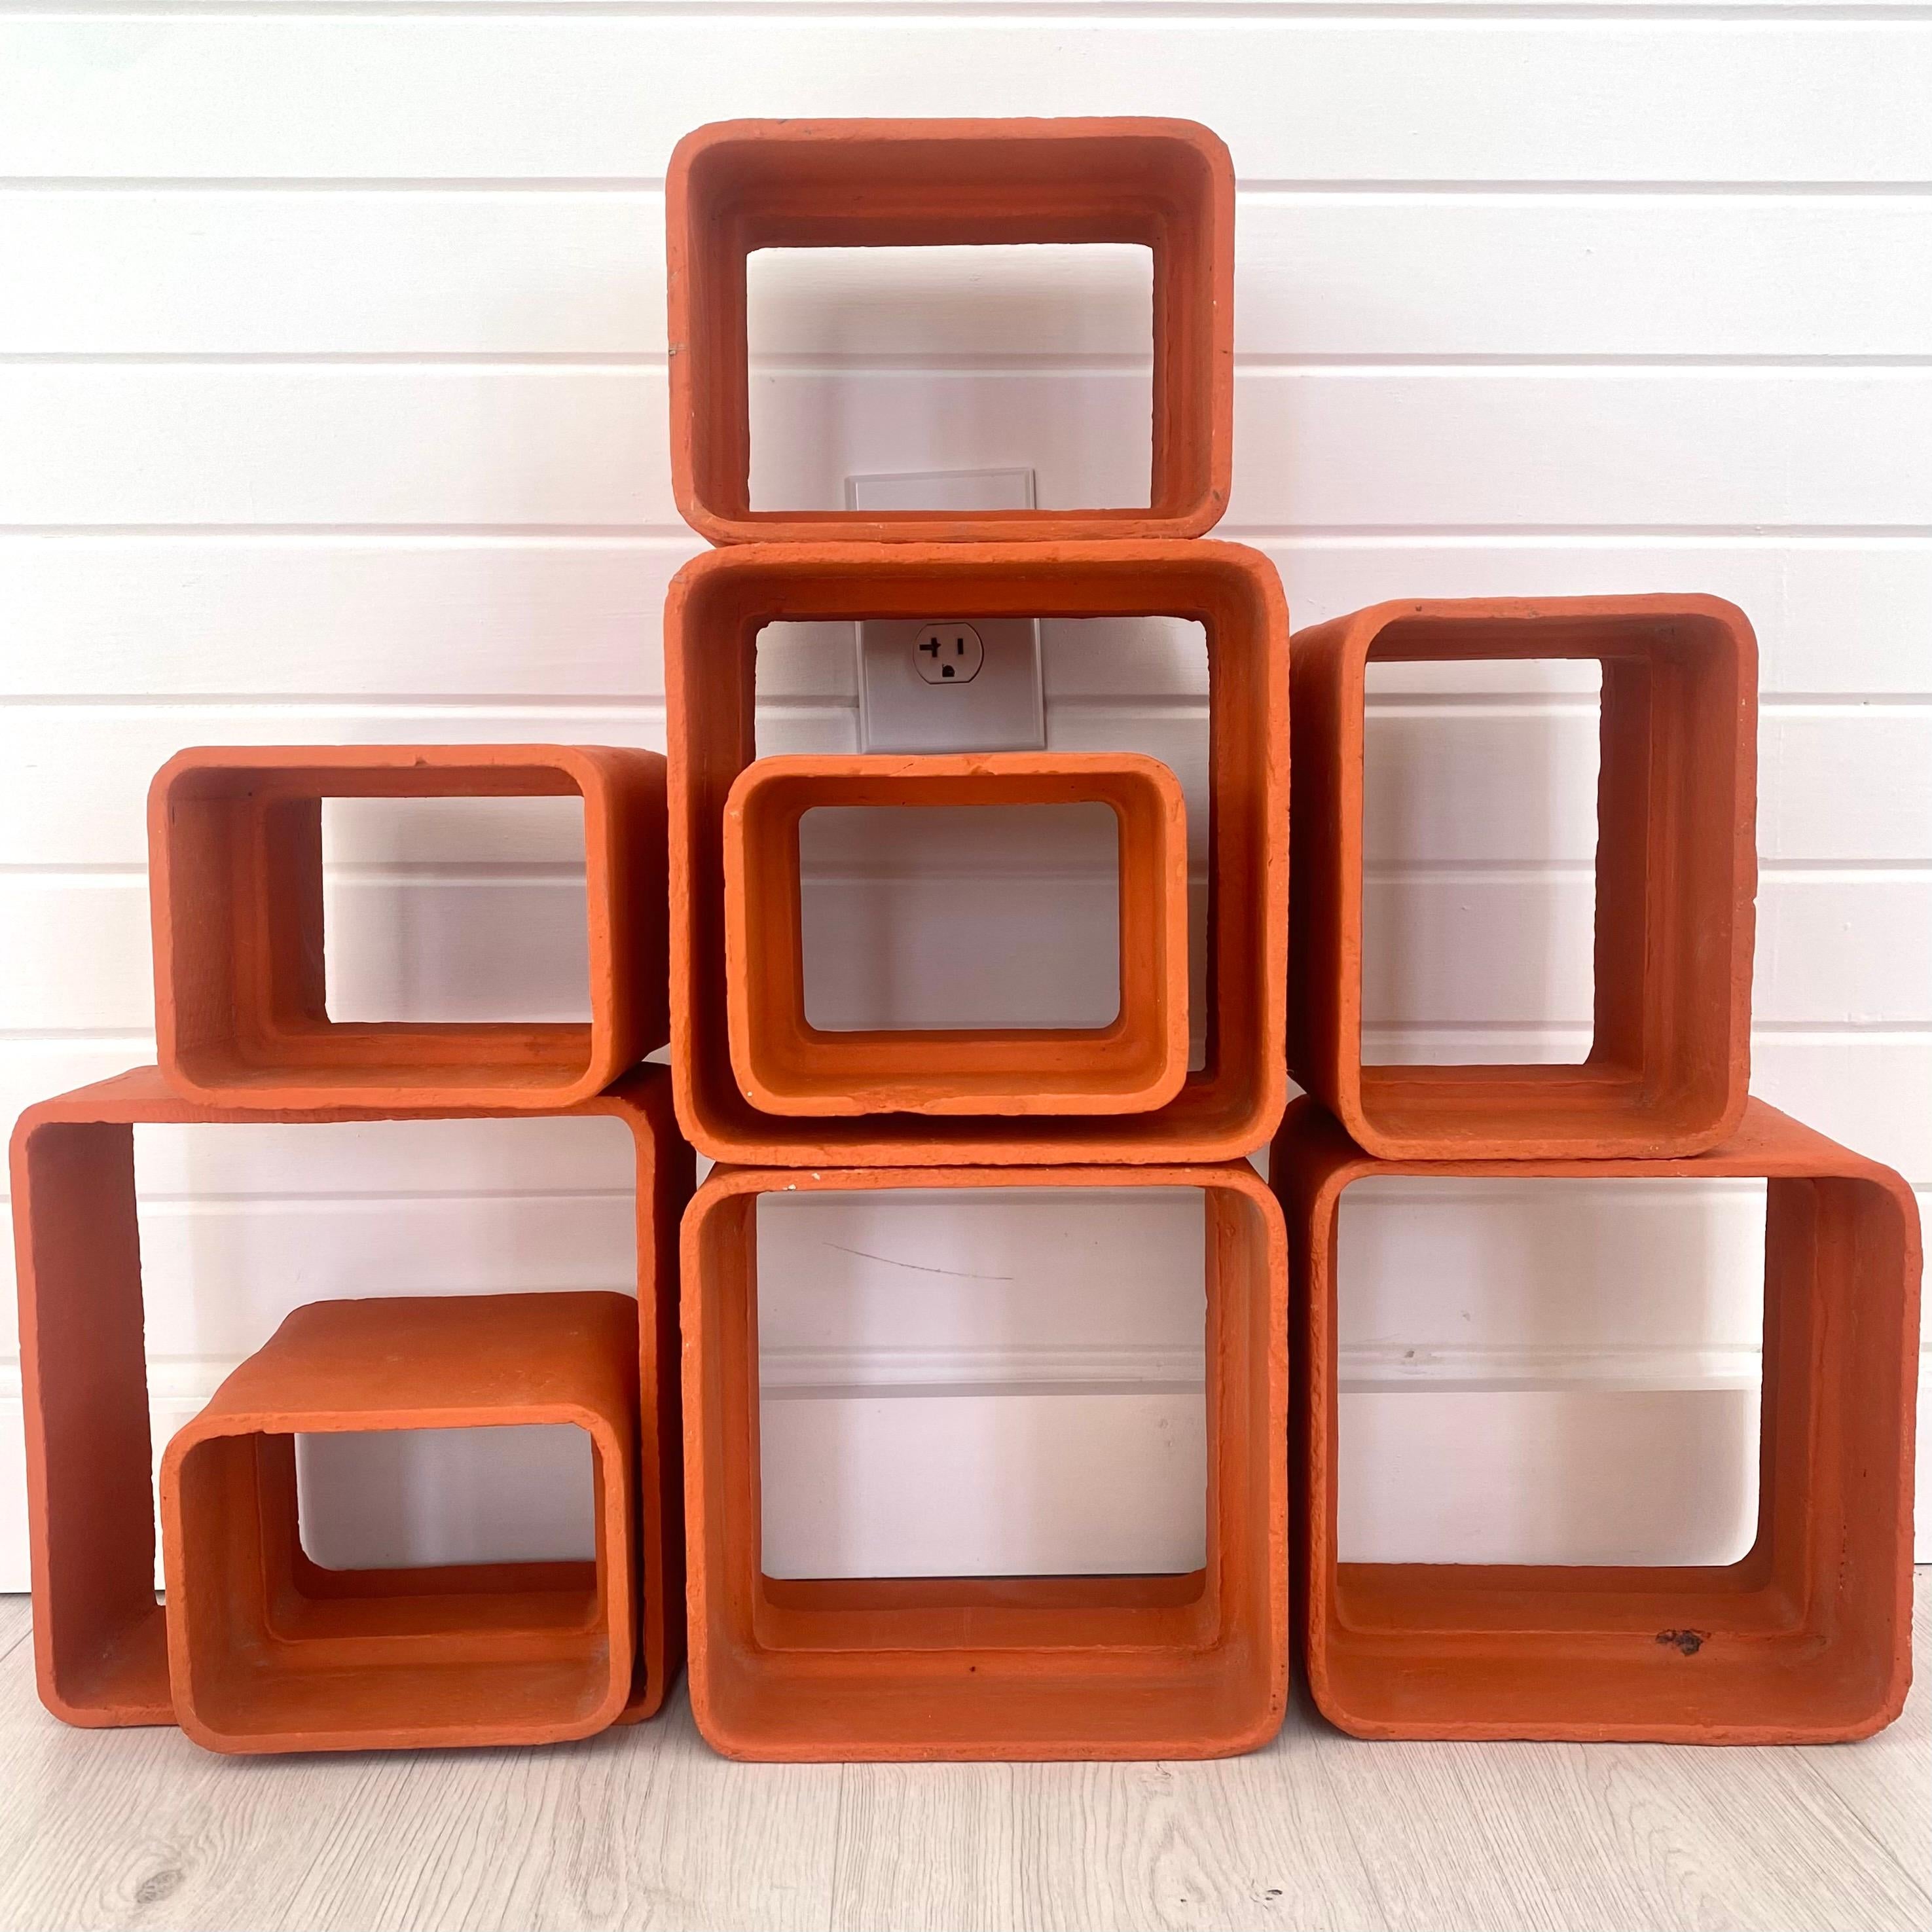 Beautiful set of painted concrete cubes in a pastel orange by Swiss architect and designer Willy Guhl. Handmade in the early 1960s in Switzerland. Produced by Eternit. Set of 9 cubes in great original condition. Can be arranged in a multitude of